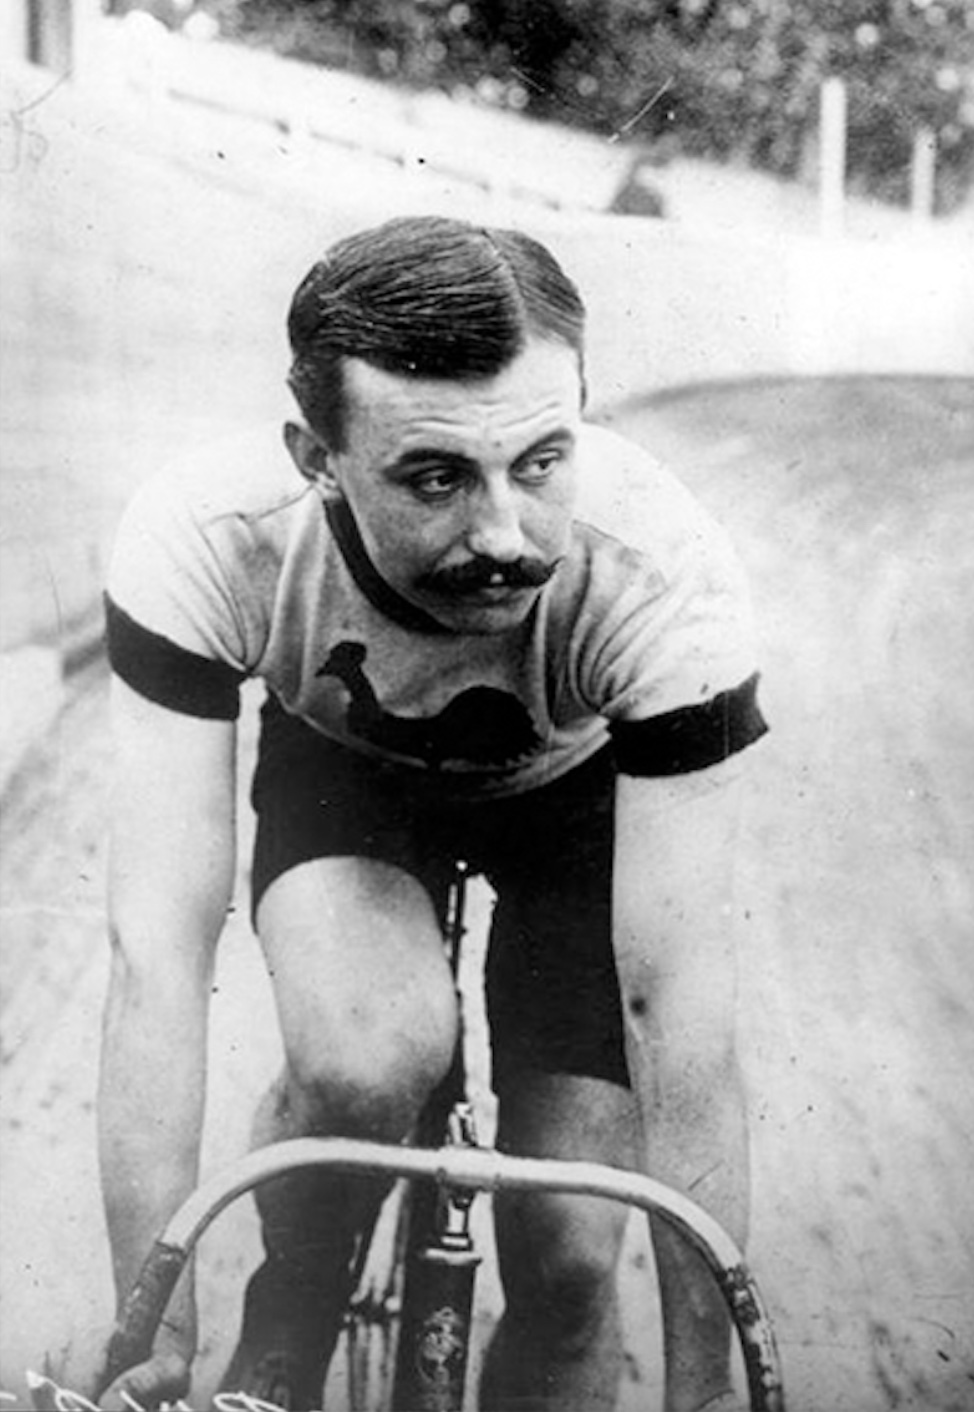 An old photo of a man riding a bicycle.